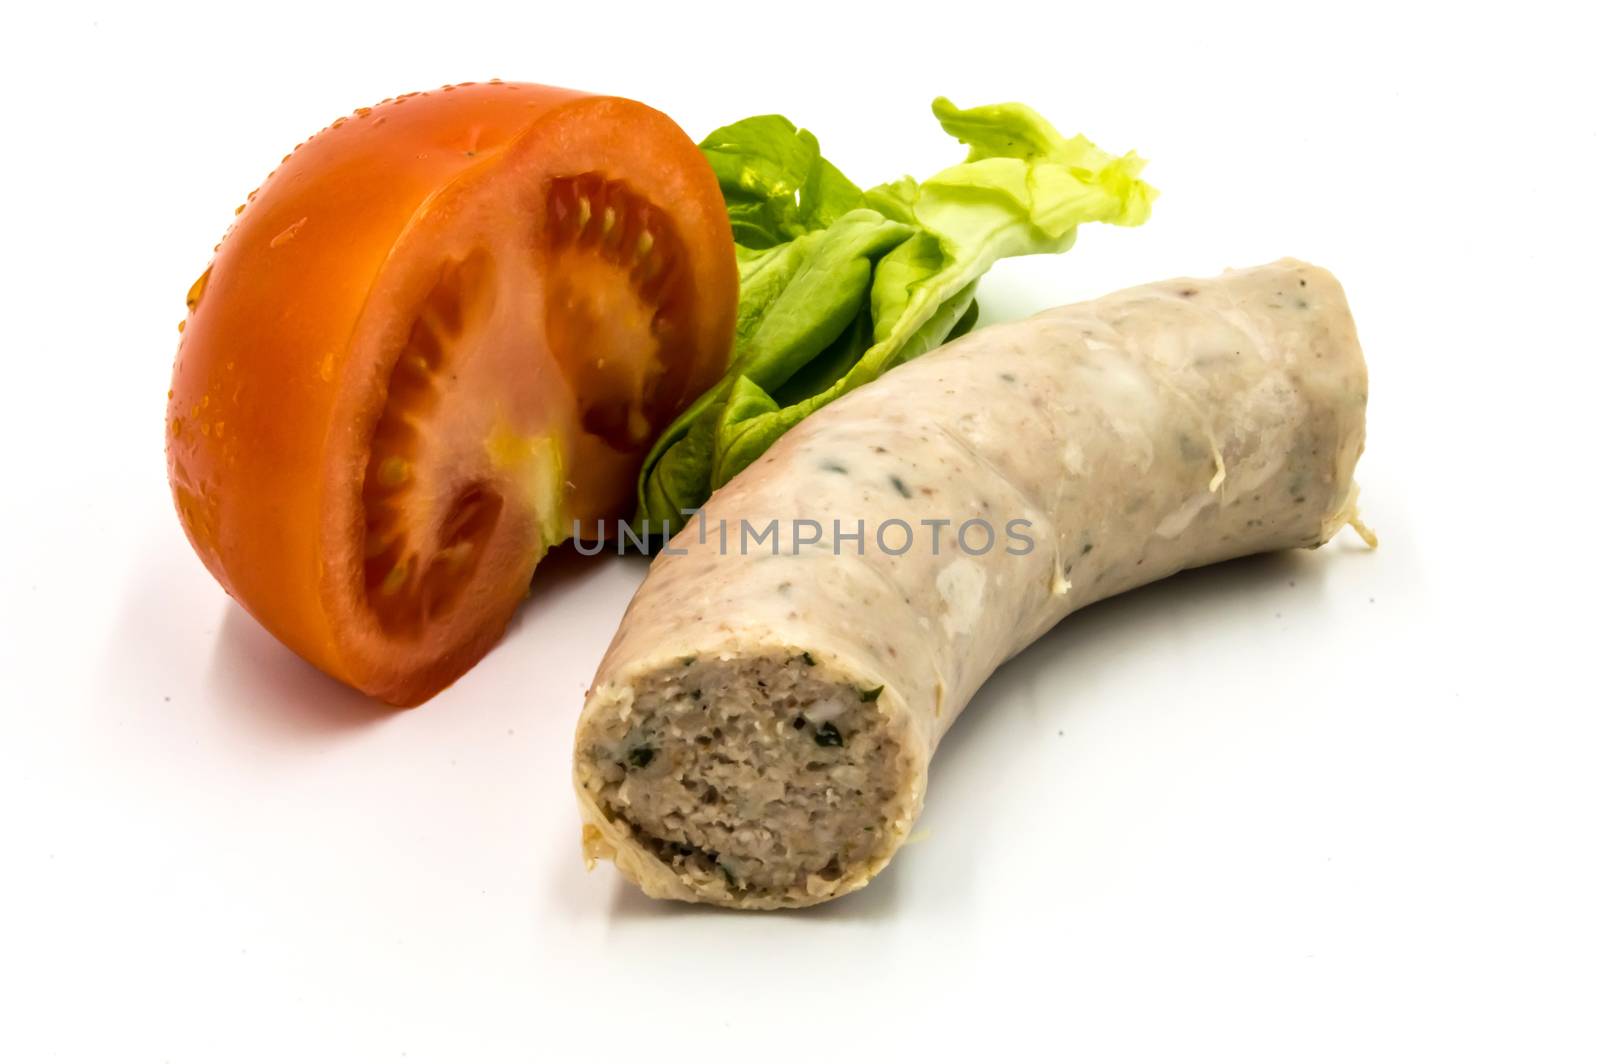 Piece of white sausage on a white background with  by Philou1000